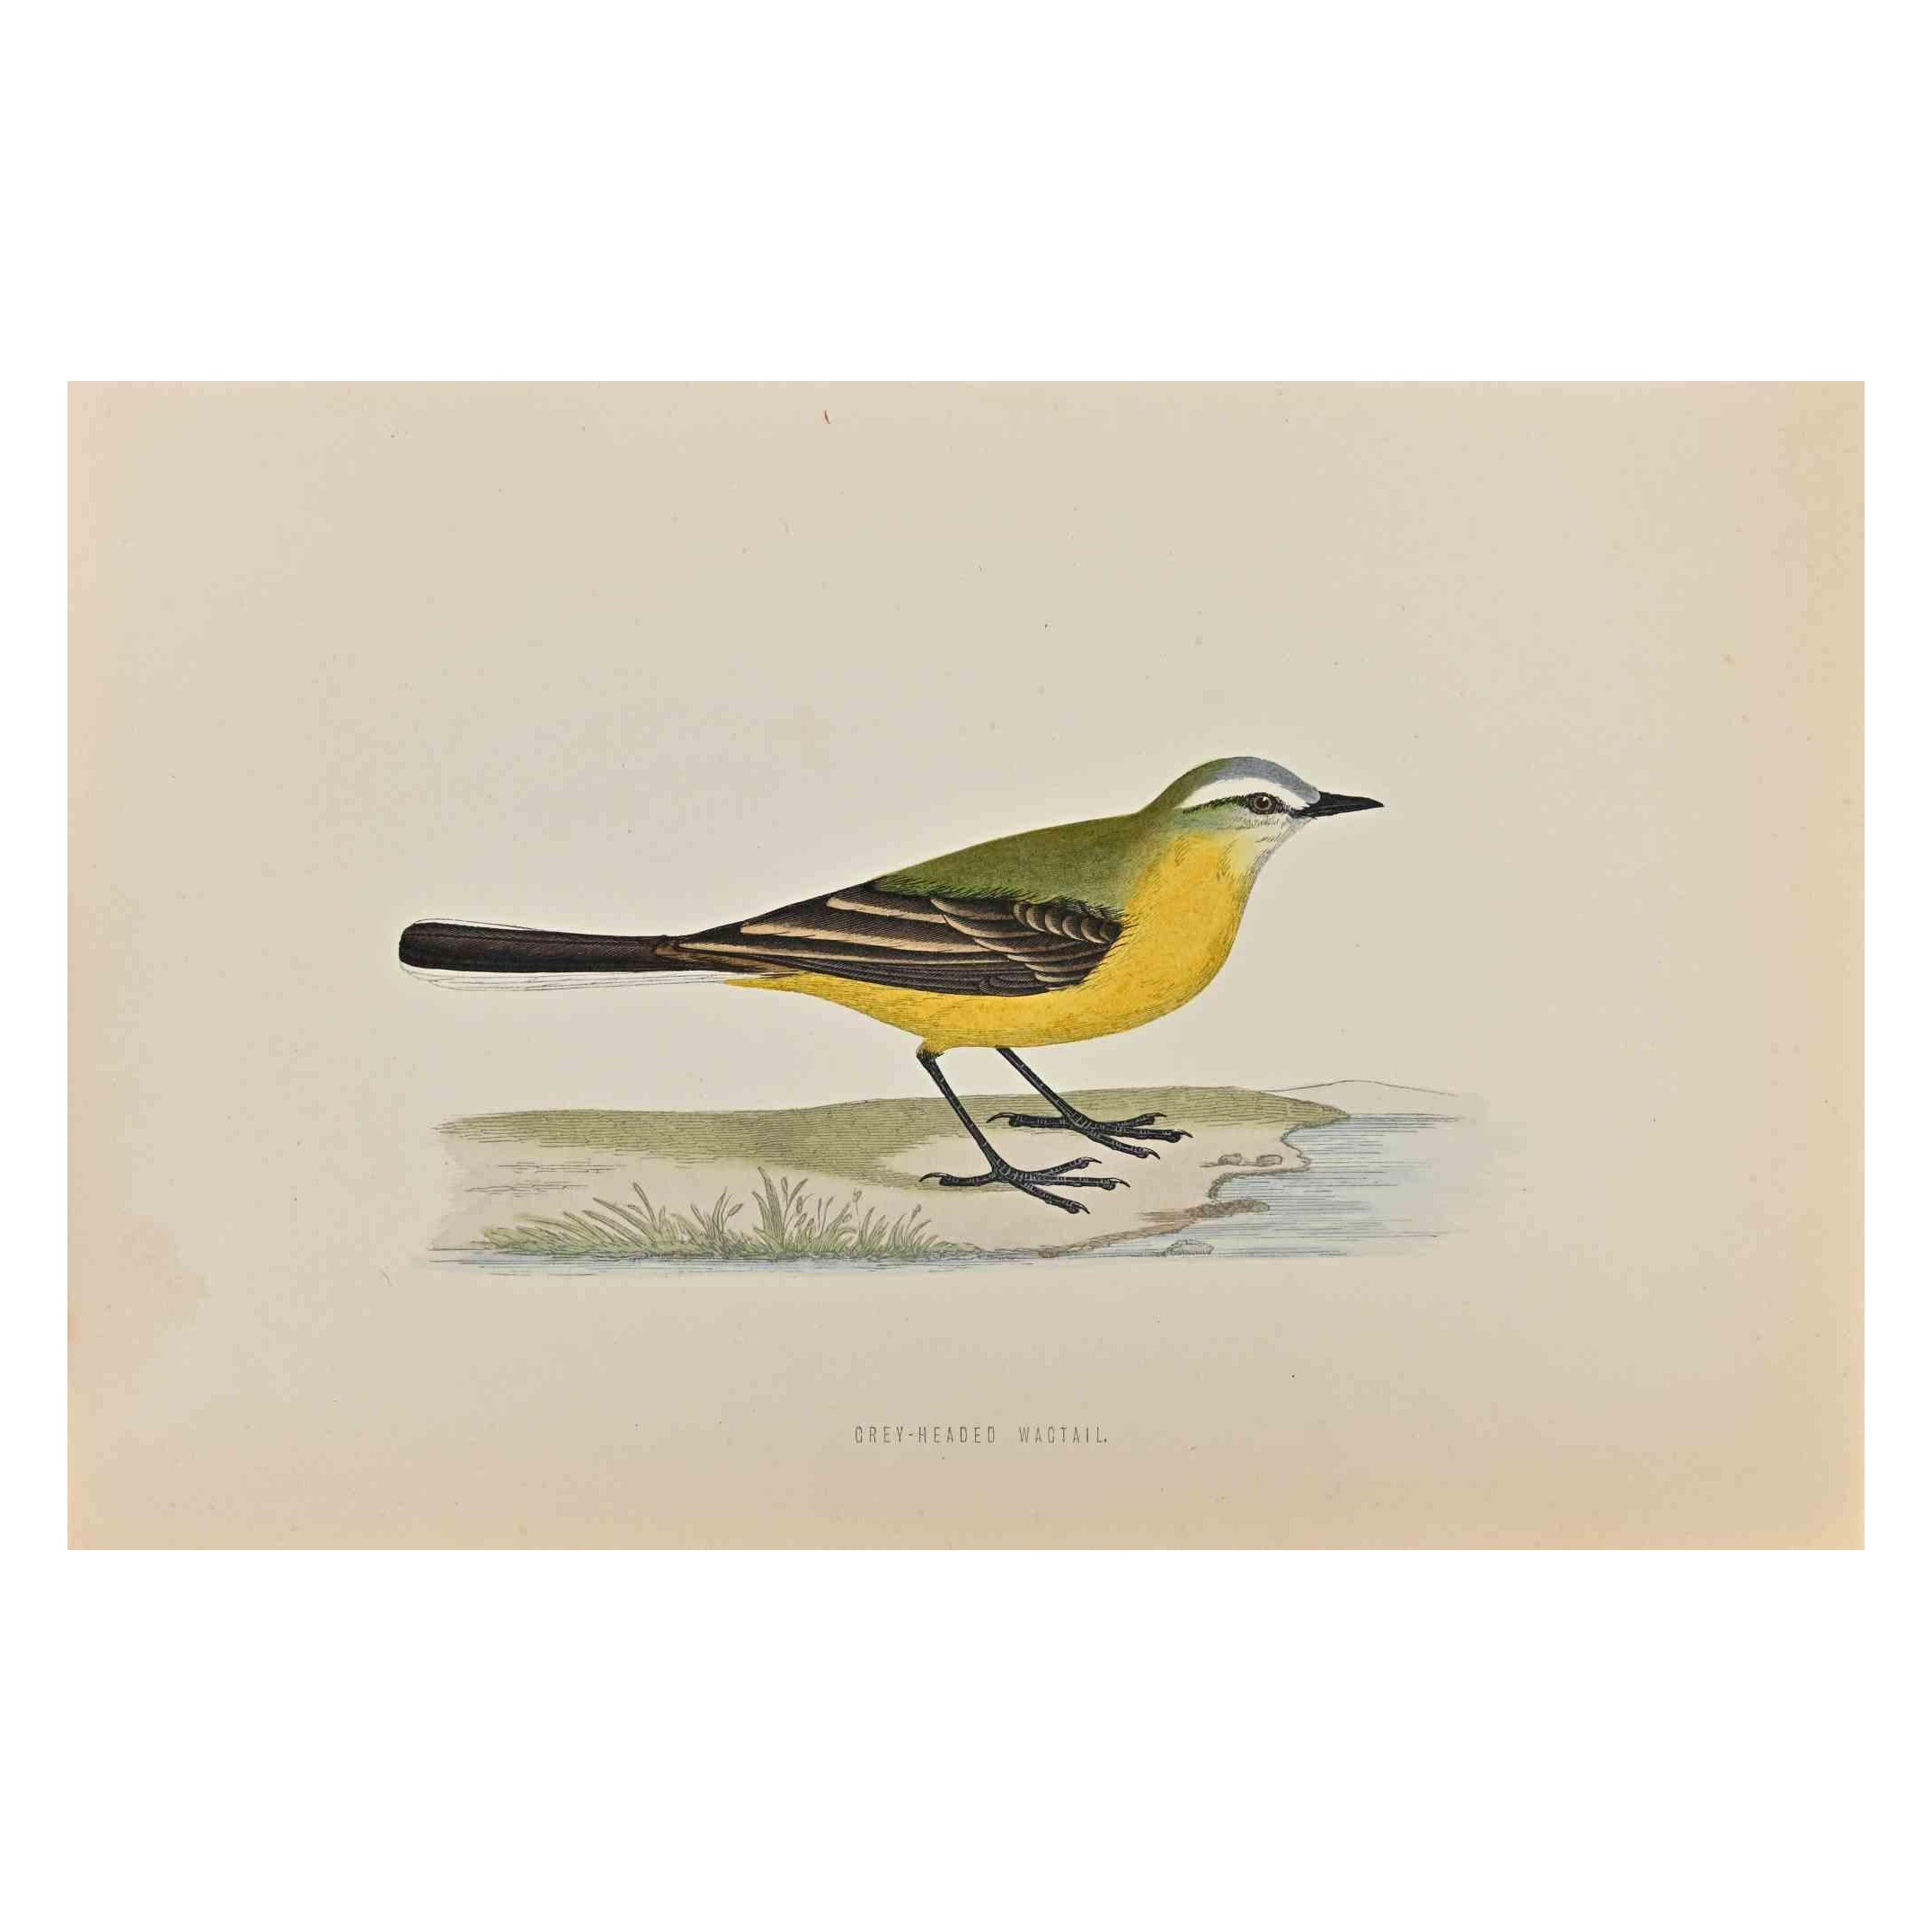 Grey-Headed Wagtail is a modern artwork realized in 1870 by the British artist Alexander Francis Lydon (1836-1917).

Woodcut print on ivory-colored paper.

Hand-colored, published by London, Bell & Sons, 1870.  

The name of the bird is printed on